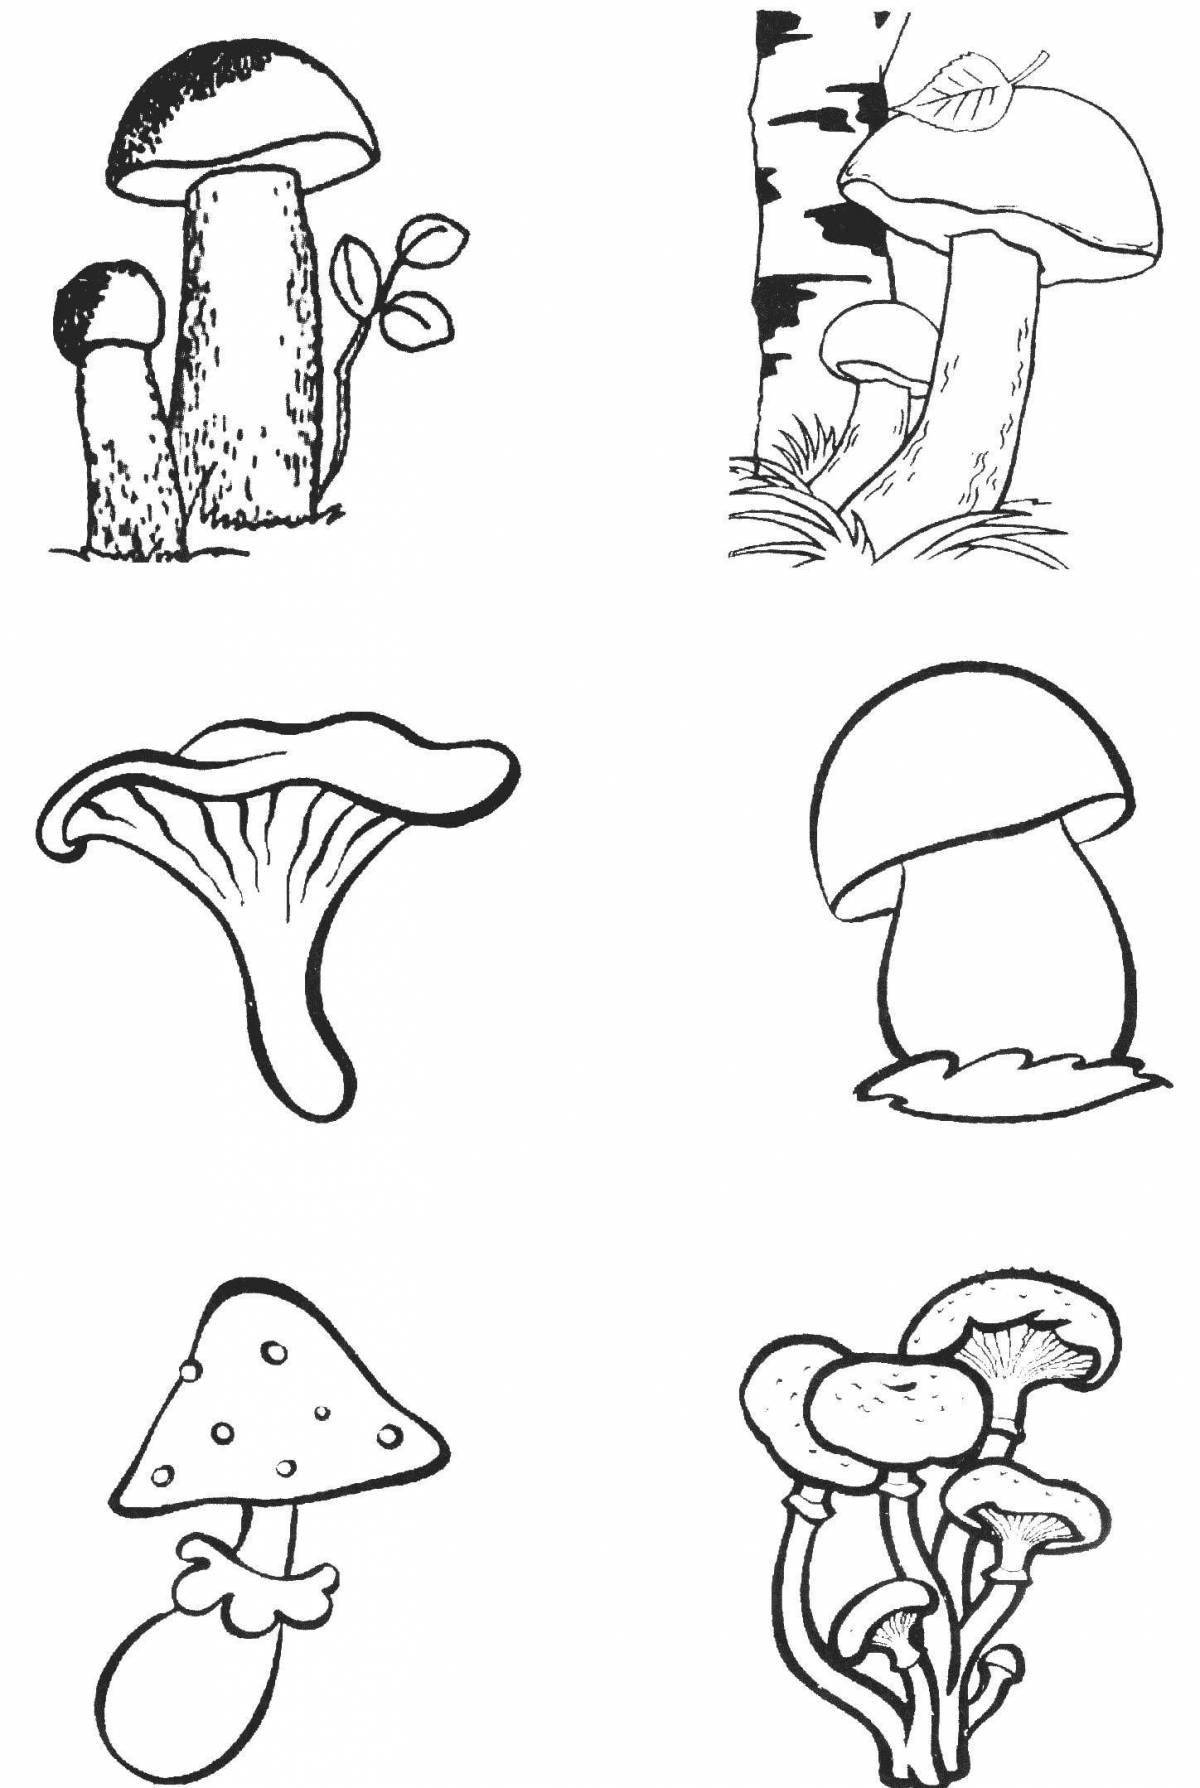 Coloring book with radiant mushrooms for children 6-7 years old